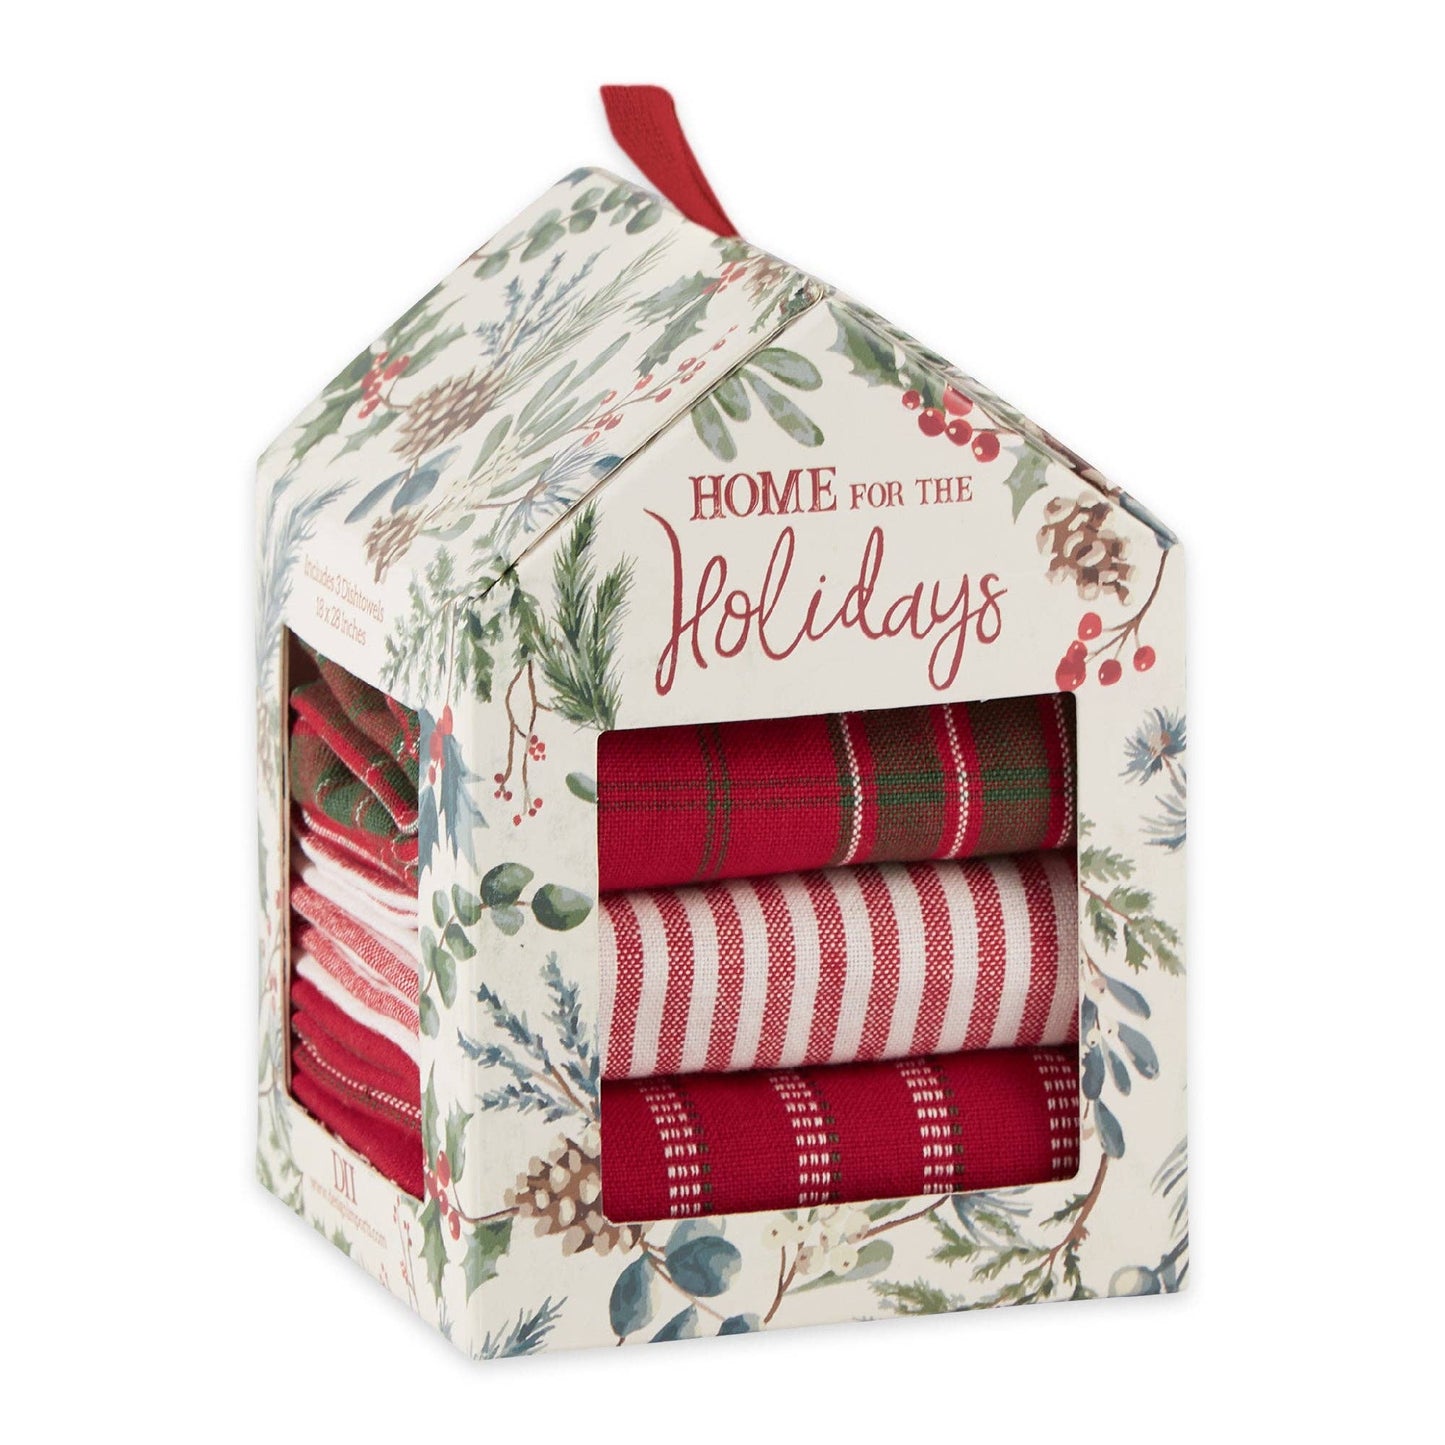 Home For The Holidays House Gift Set